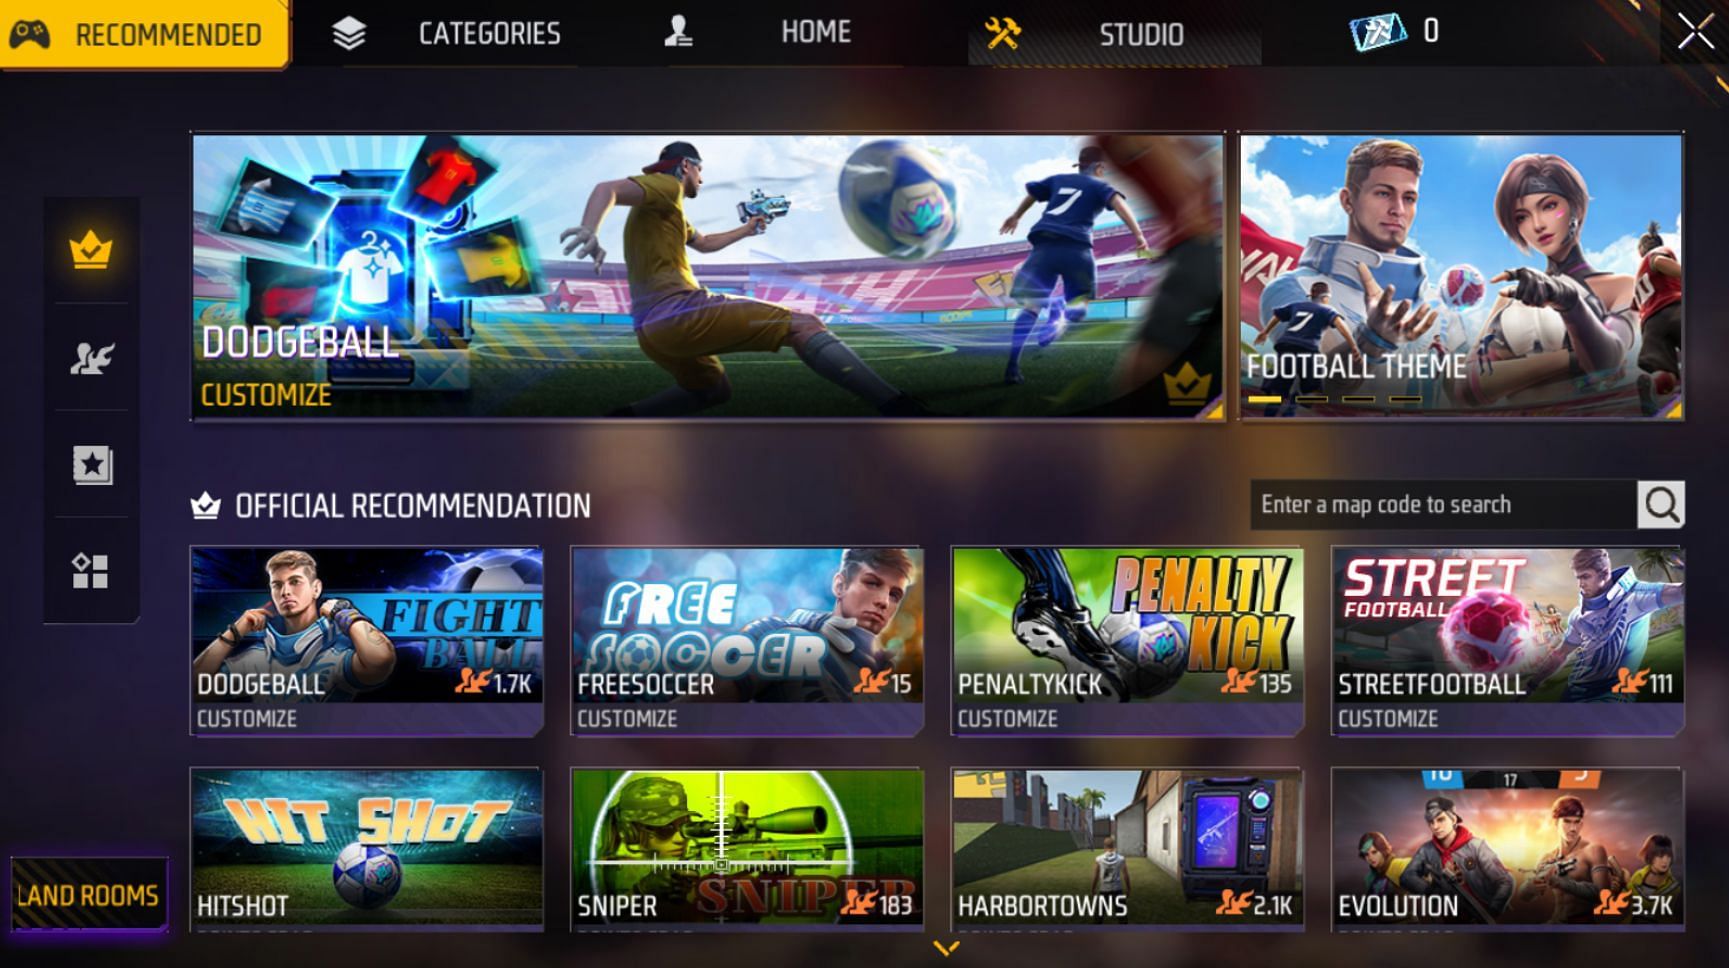 New Craftland modes/maps in Free Fire with a football theme (Image via Garena)